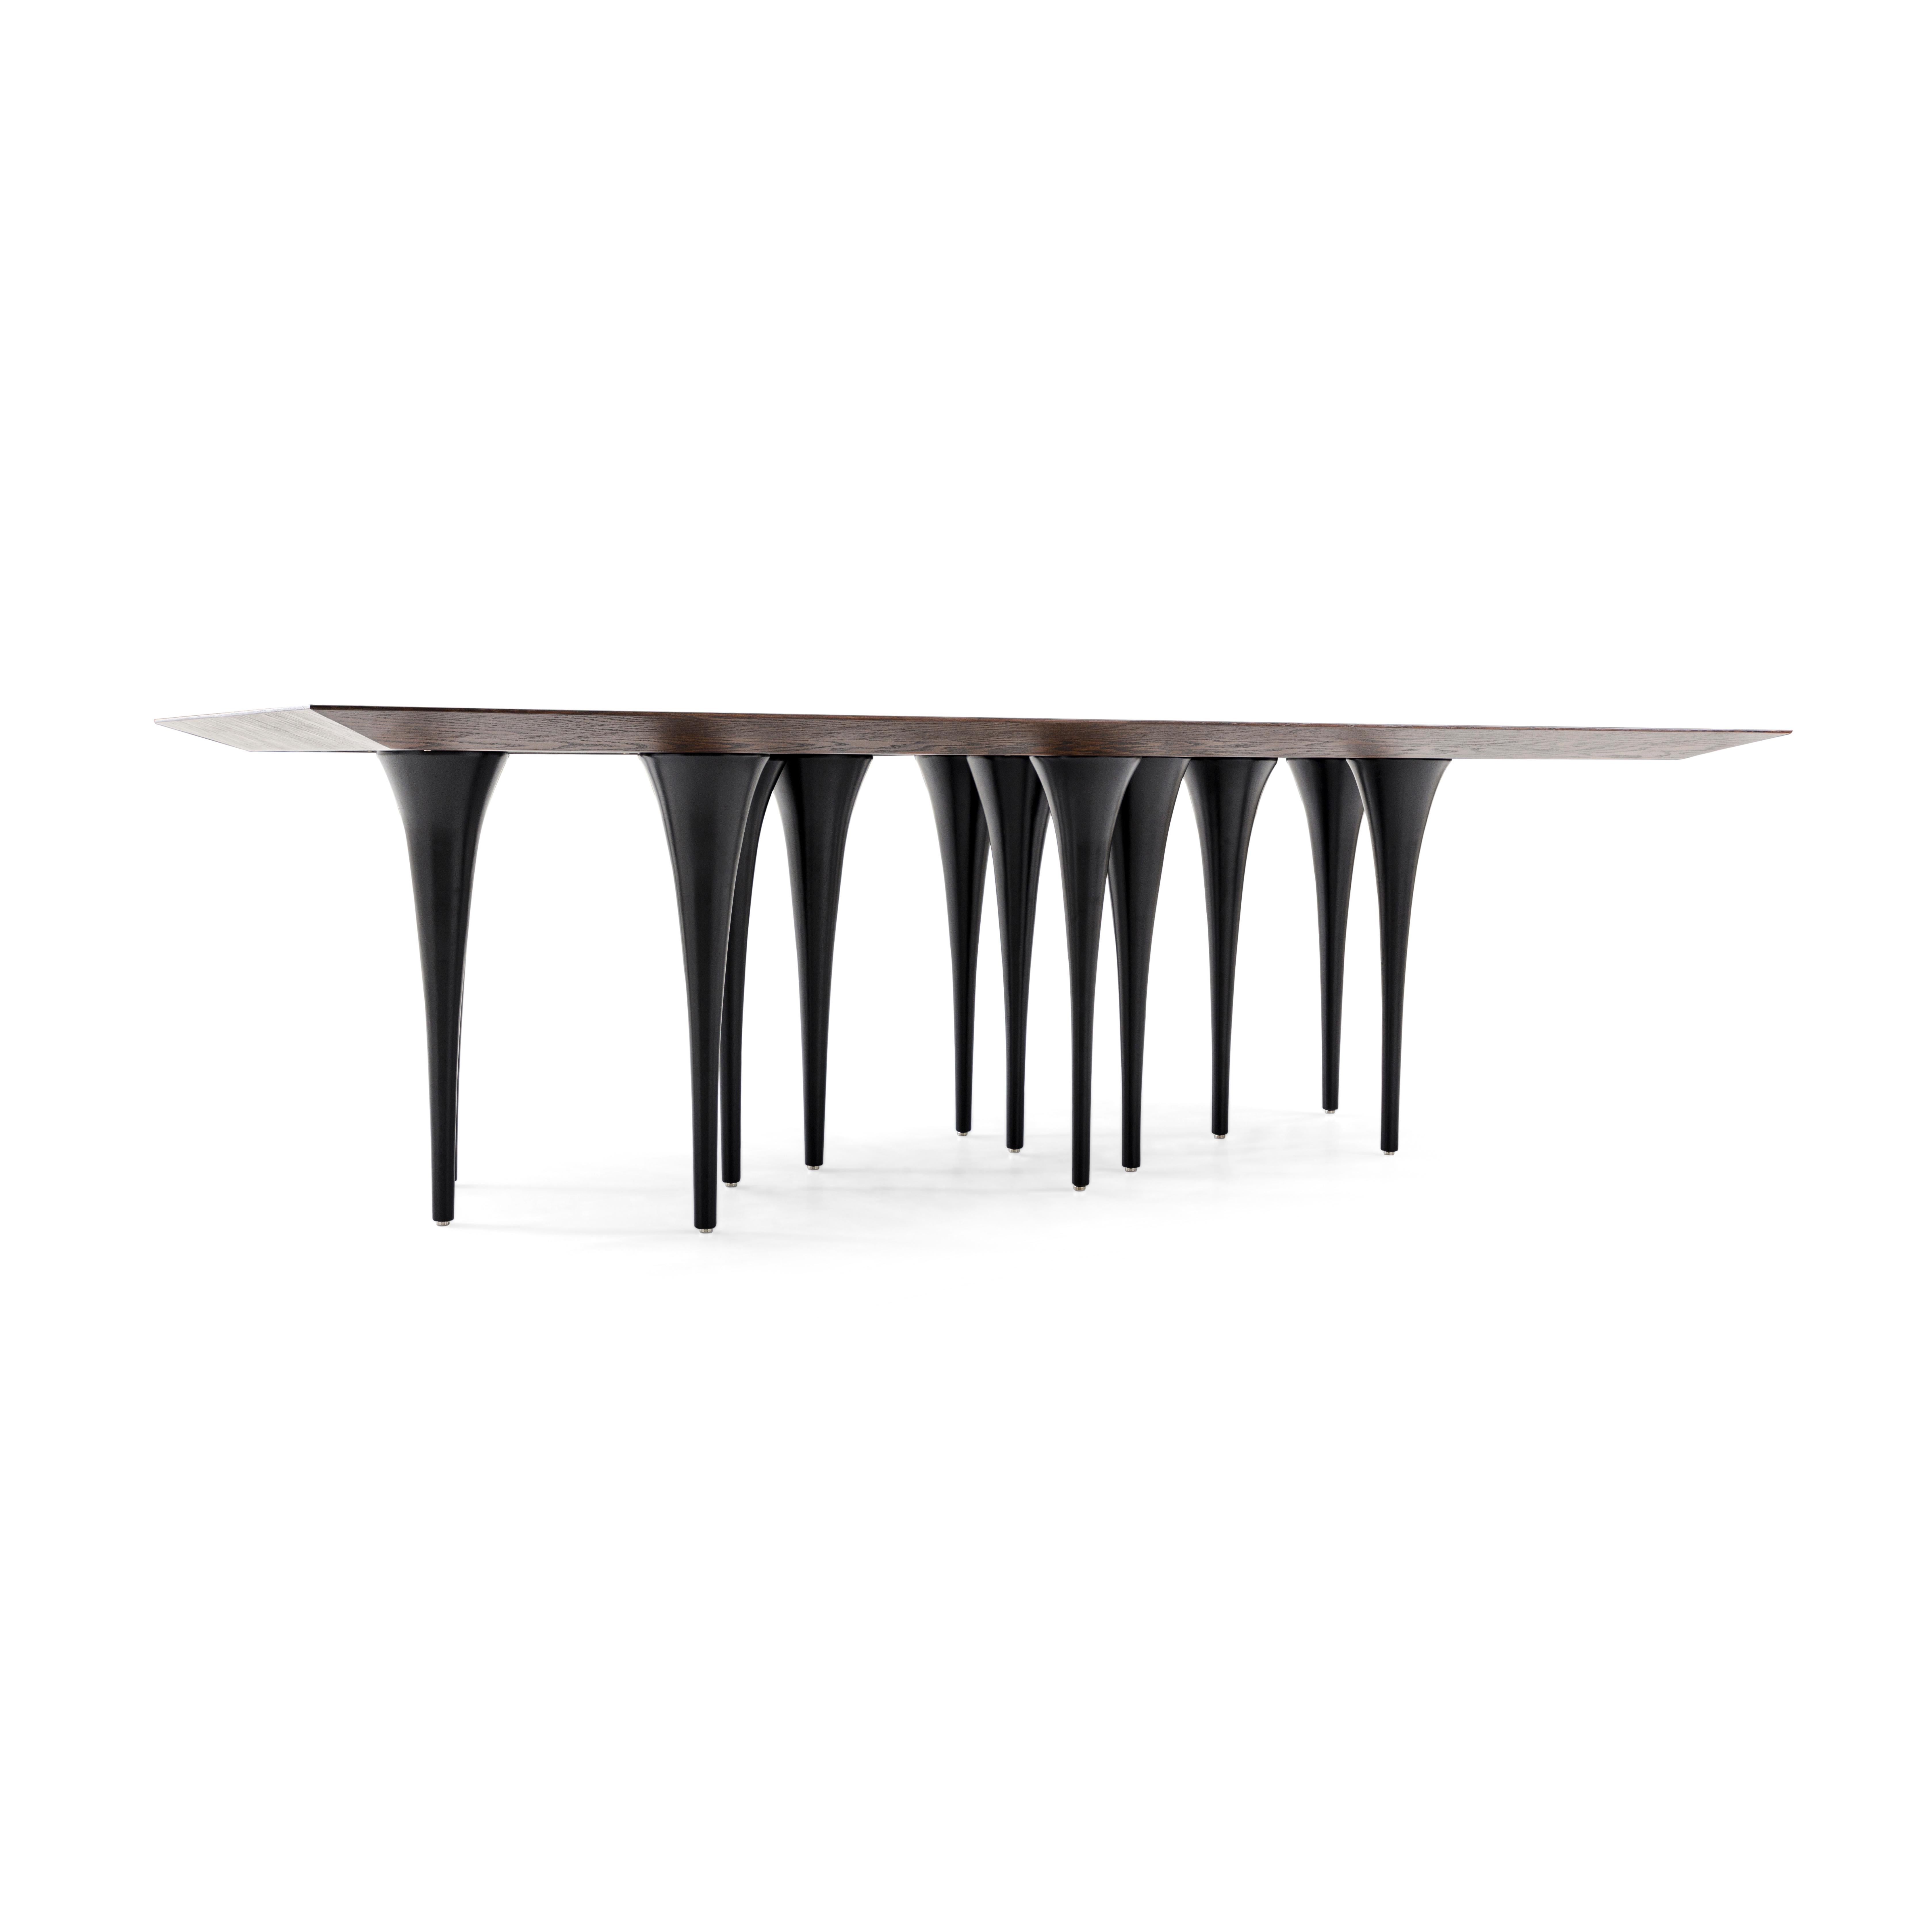 Brazilian Pin Dining Table with Veneered Black Oak Top and 12 Black Legs 98''